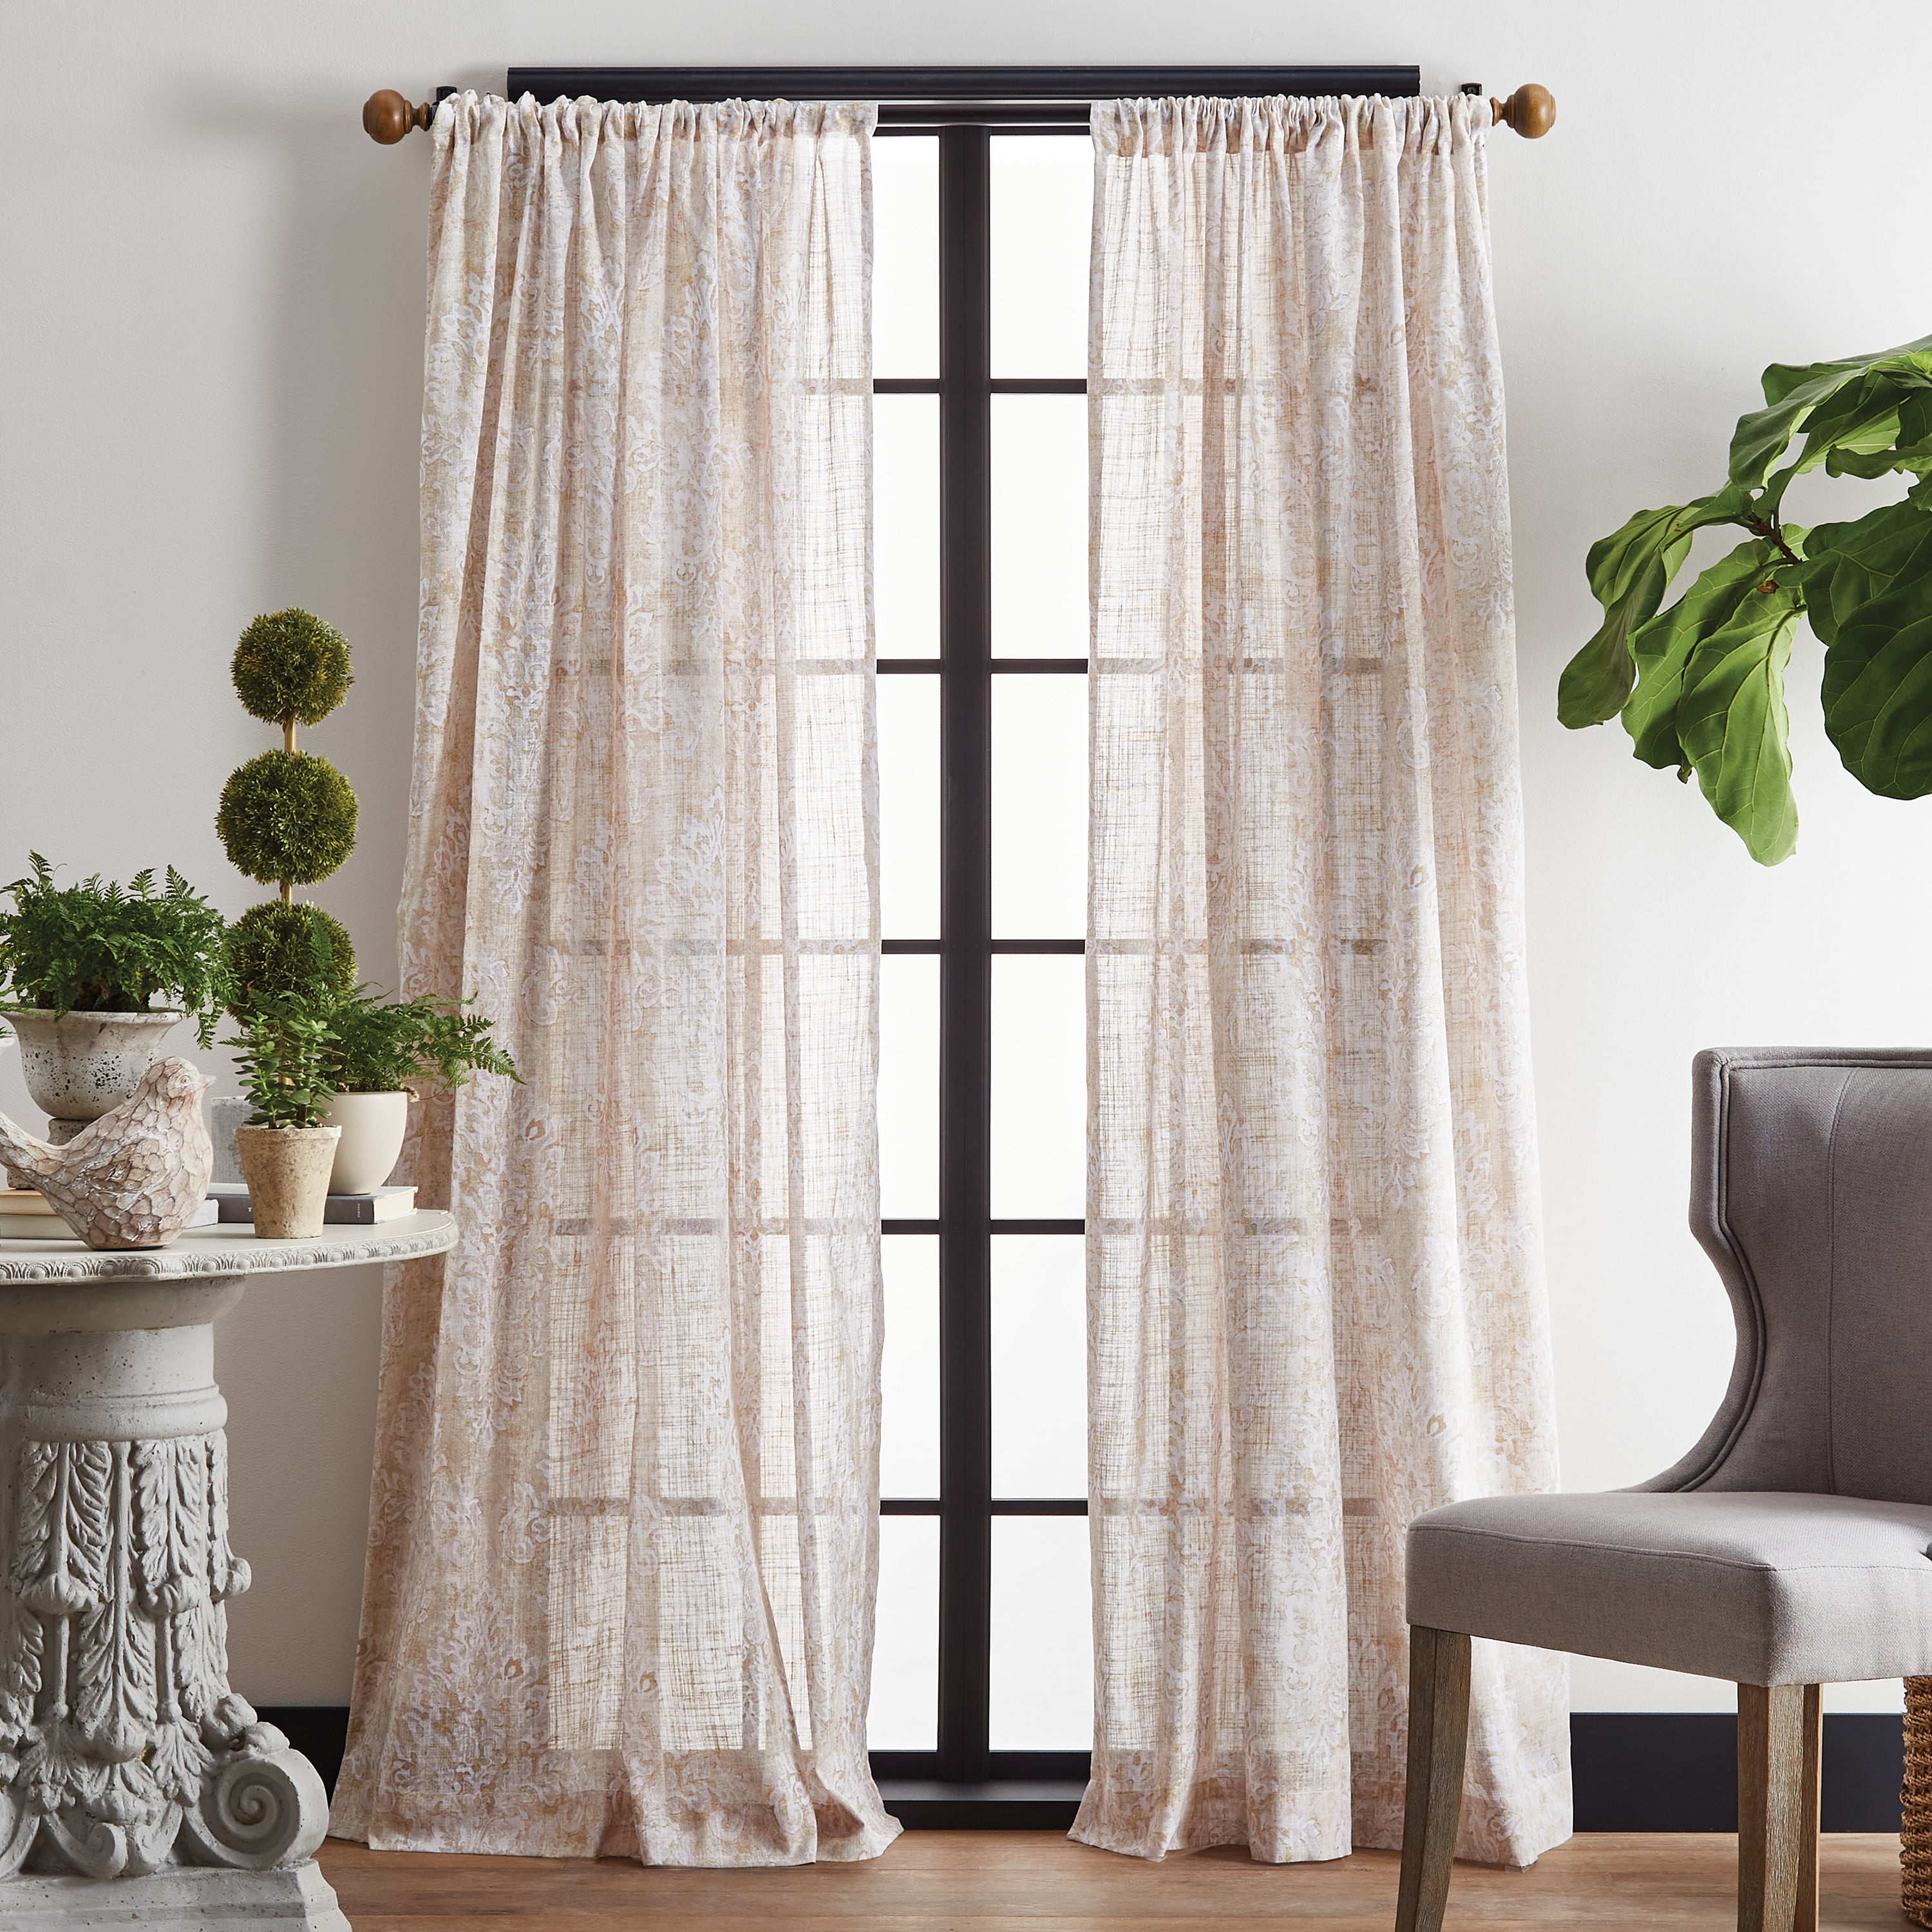 2PC Thick Solid Grommet Panel Window Curtains Blackout Living Room Bedroom Noah